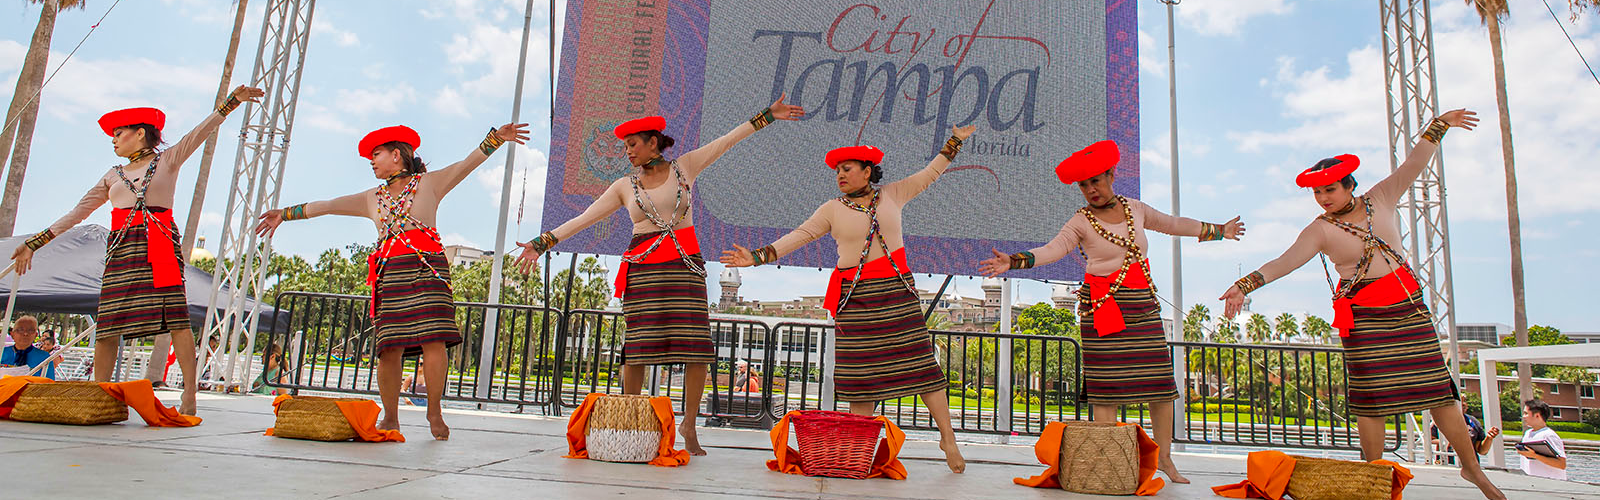 The annual festival features performances that showcase the cultures of Asia and the Pacific Islands.